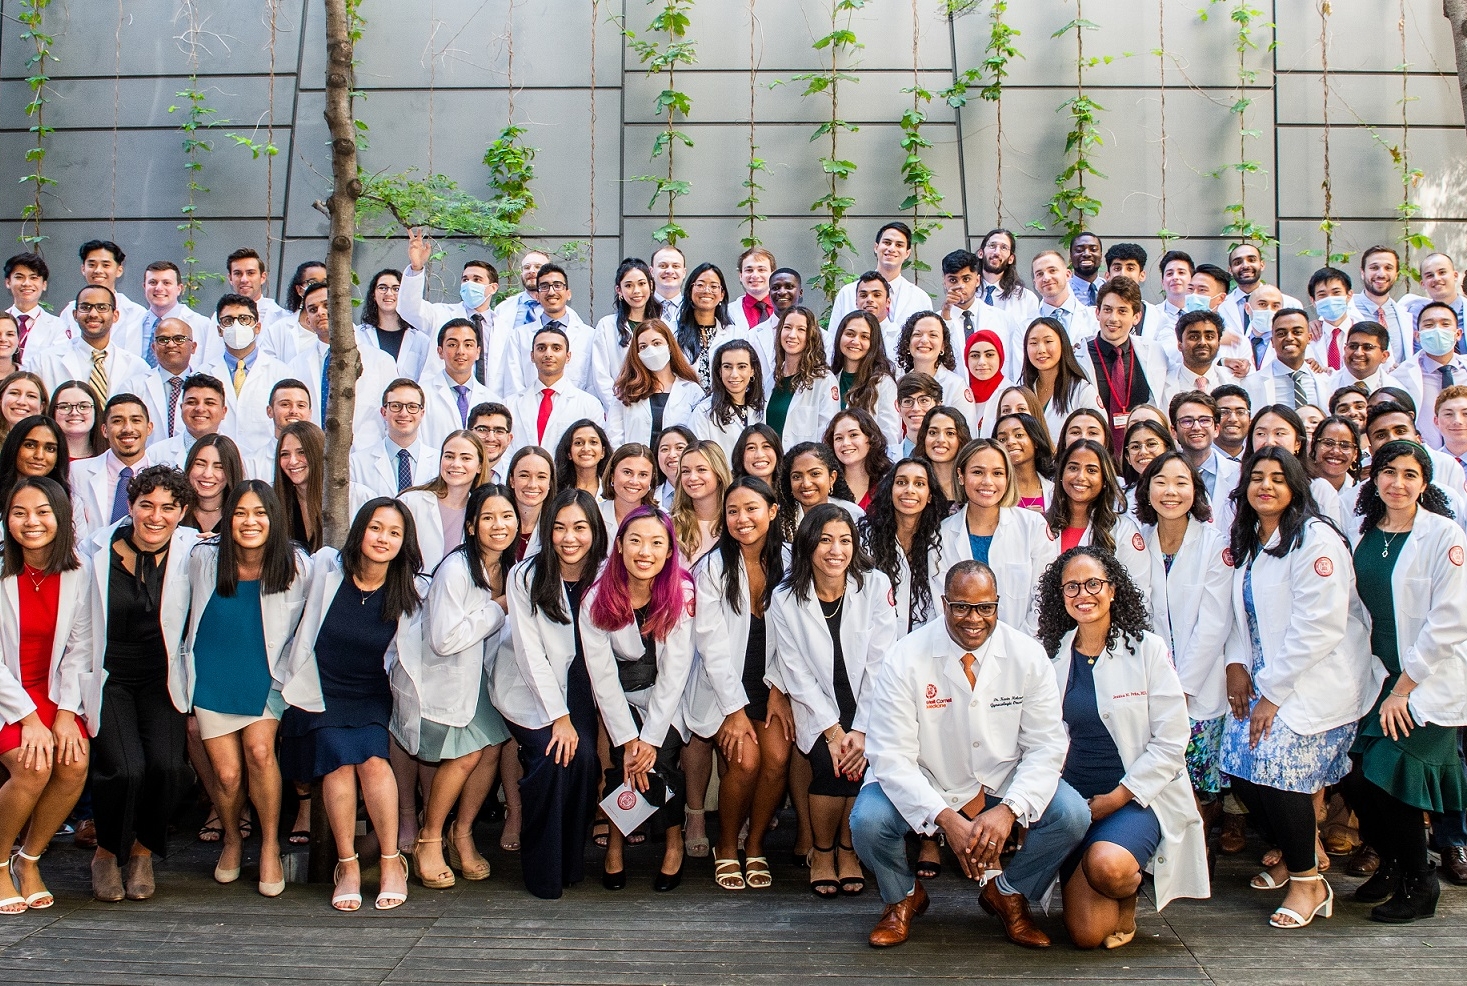 The Class of 2026 at Weill Cornell Medicine’s annual White Coat Ceremony on Aug. 16, 2022. All photos by Studio Brooke.